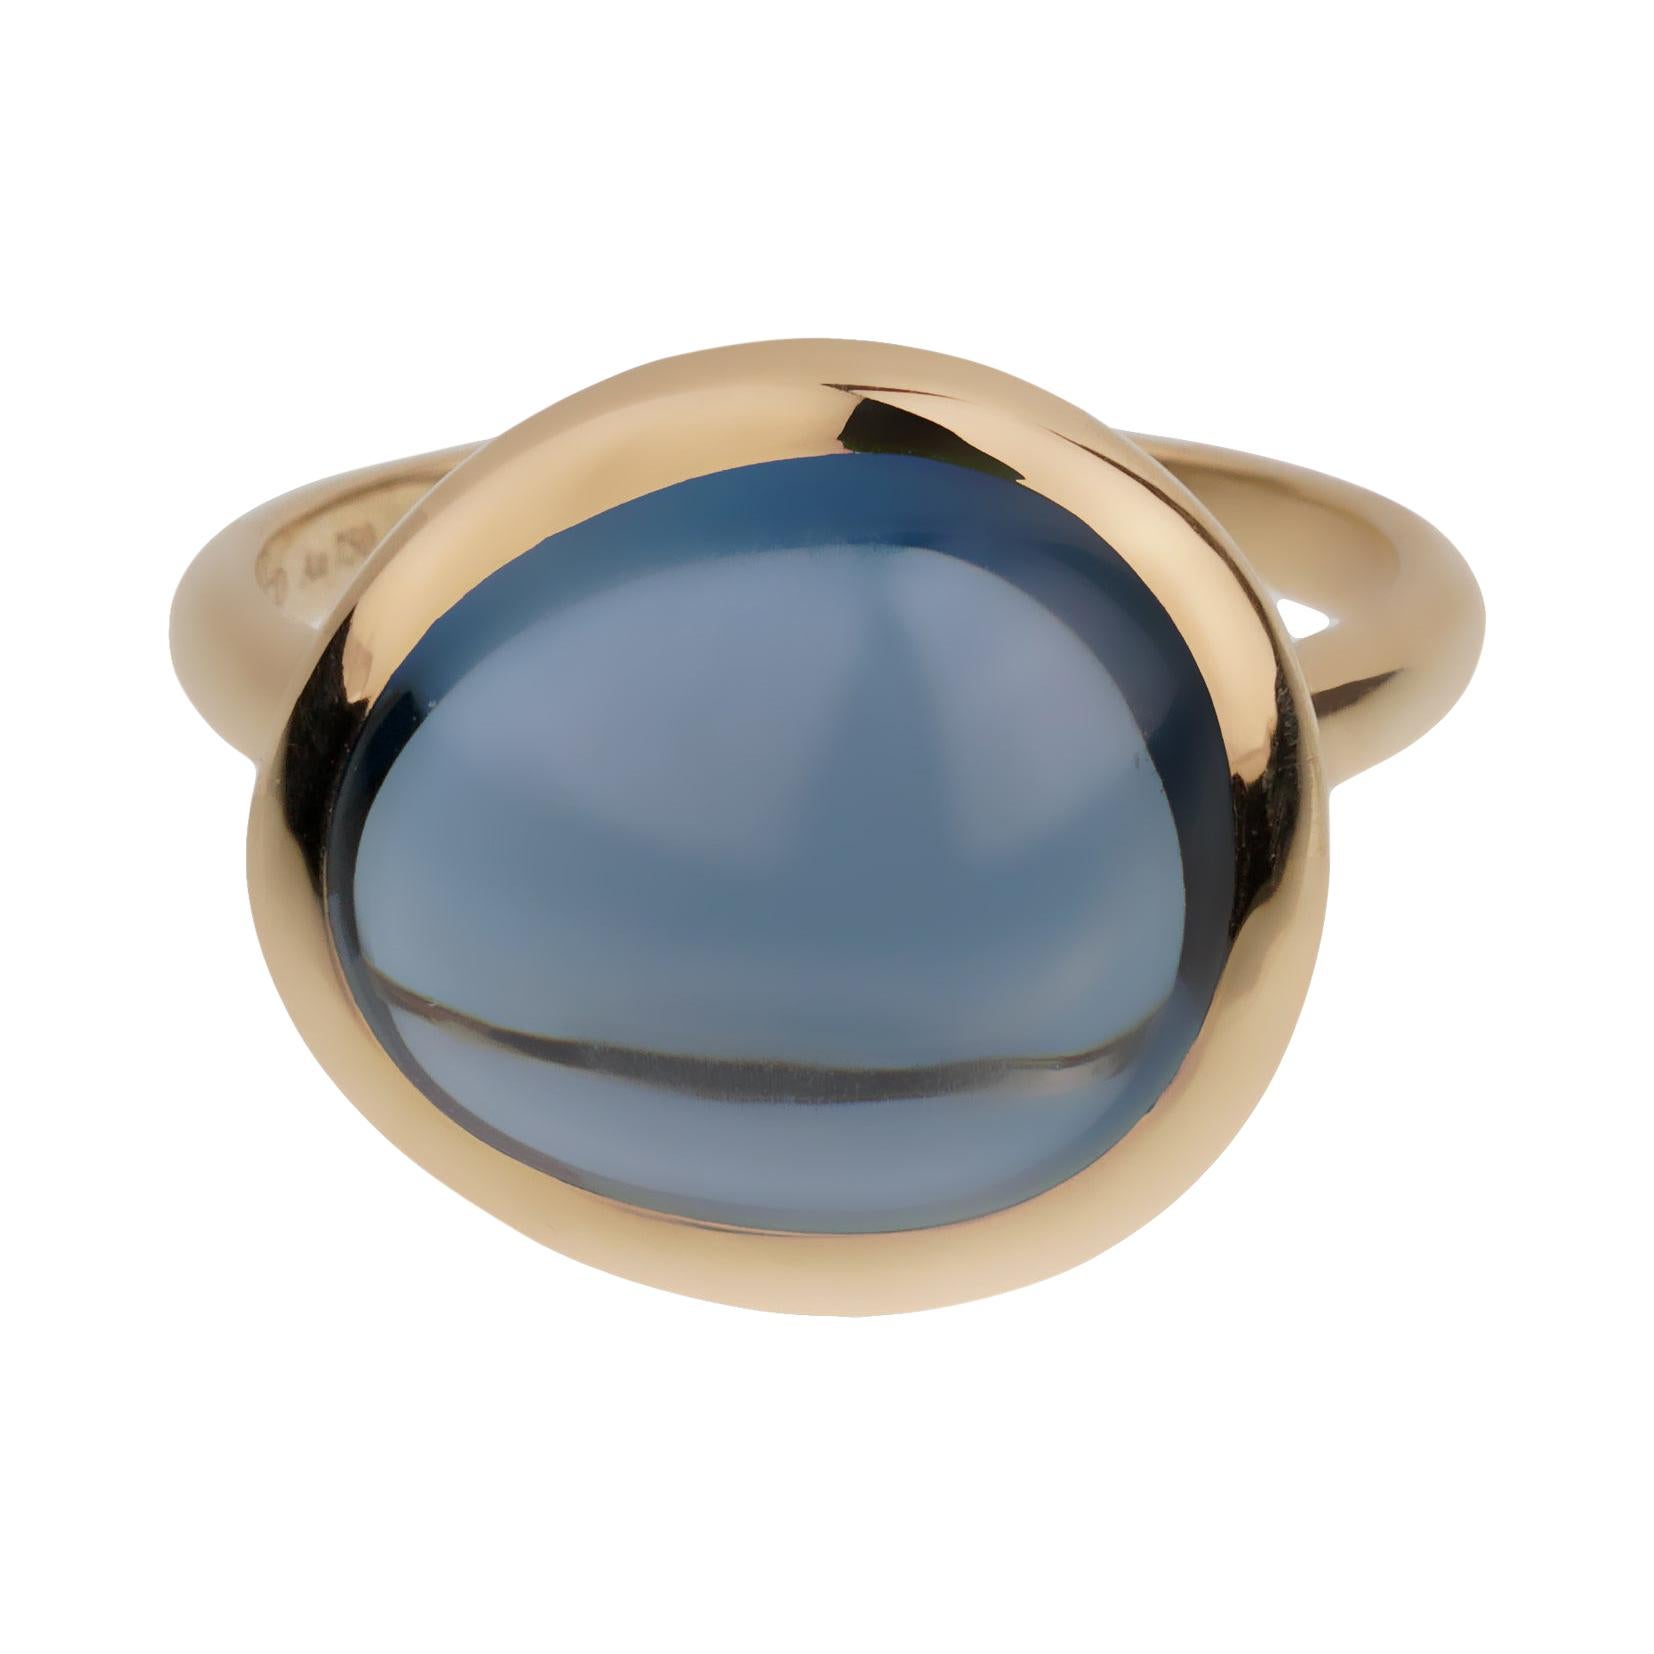 A chic Fred of Paris cocktail ring showcasing a 7ct London Topaz wrapped in 18k yellow gold. The ring measures a size 6 and can be resized if needed.